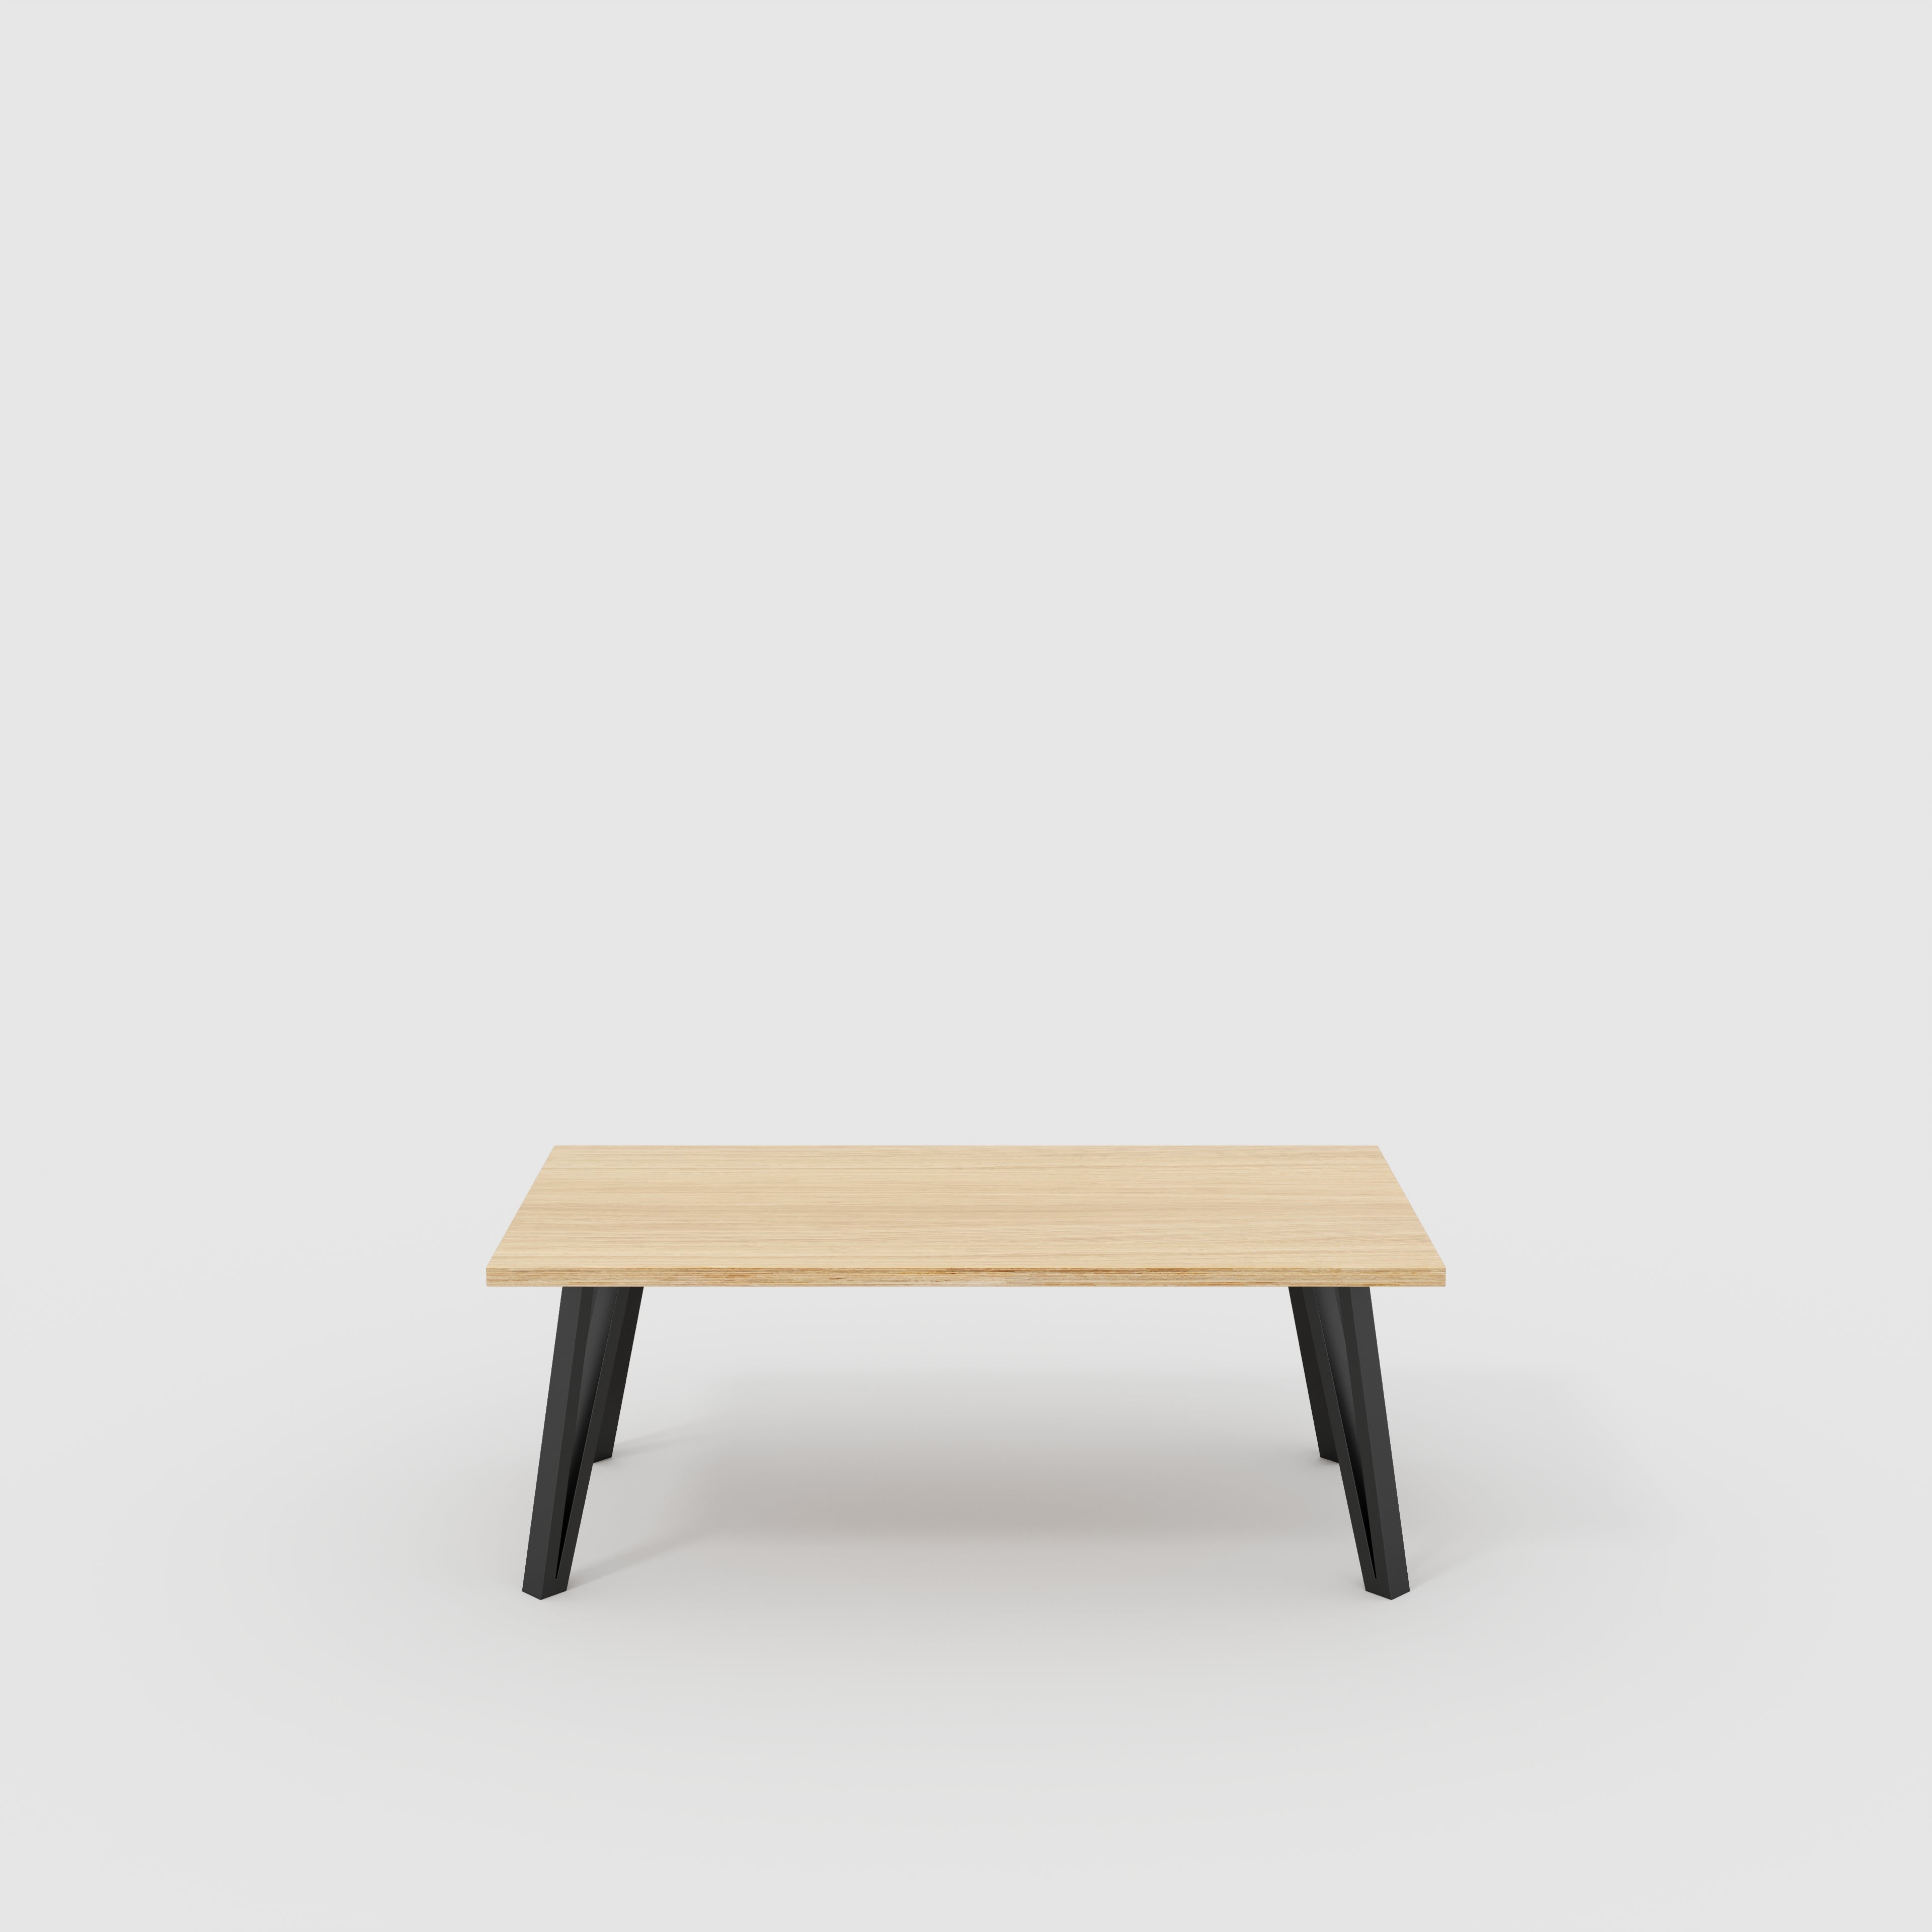 Coffee Table with Black Box Hairpin Legs - Plywood Oak - 1200(w) x 600(d) x 425(h)